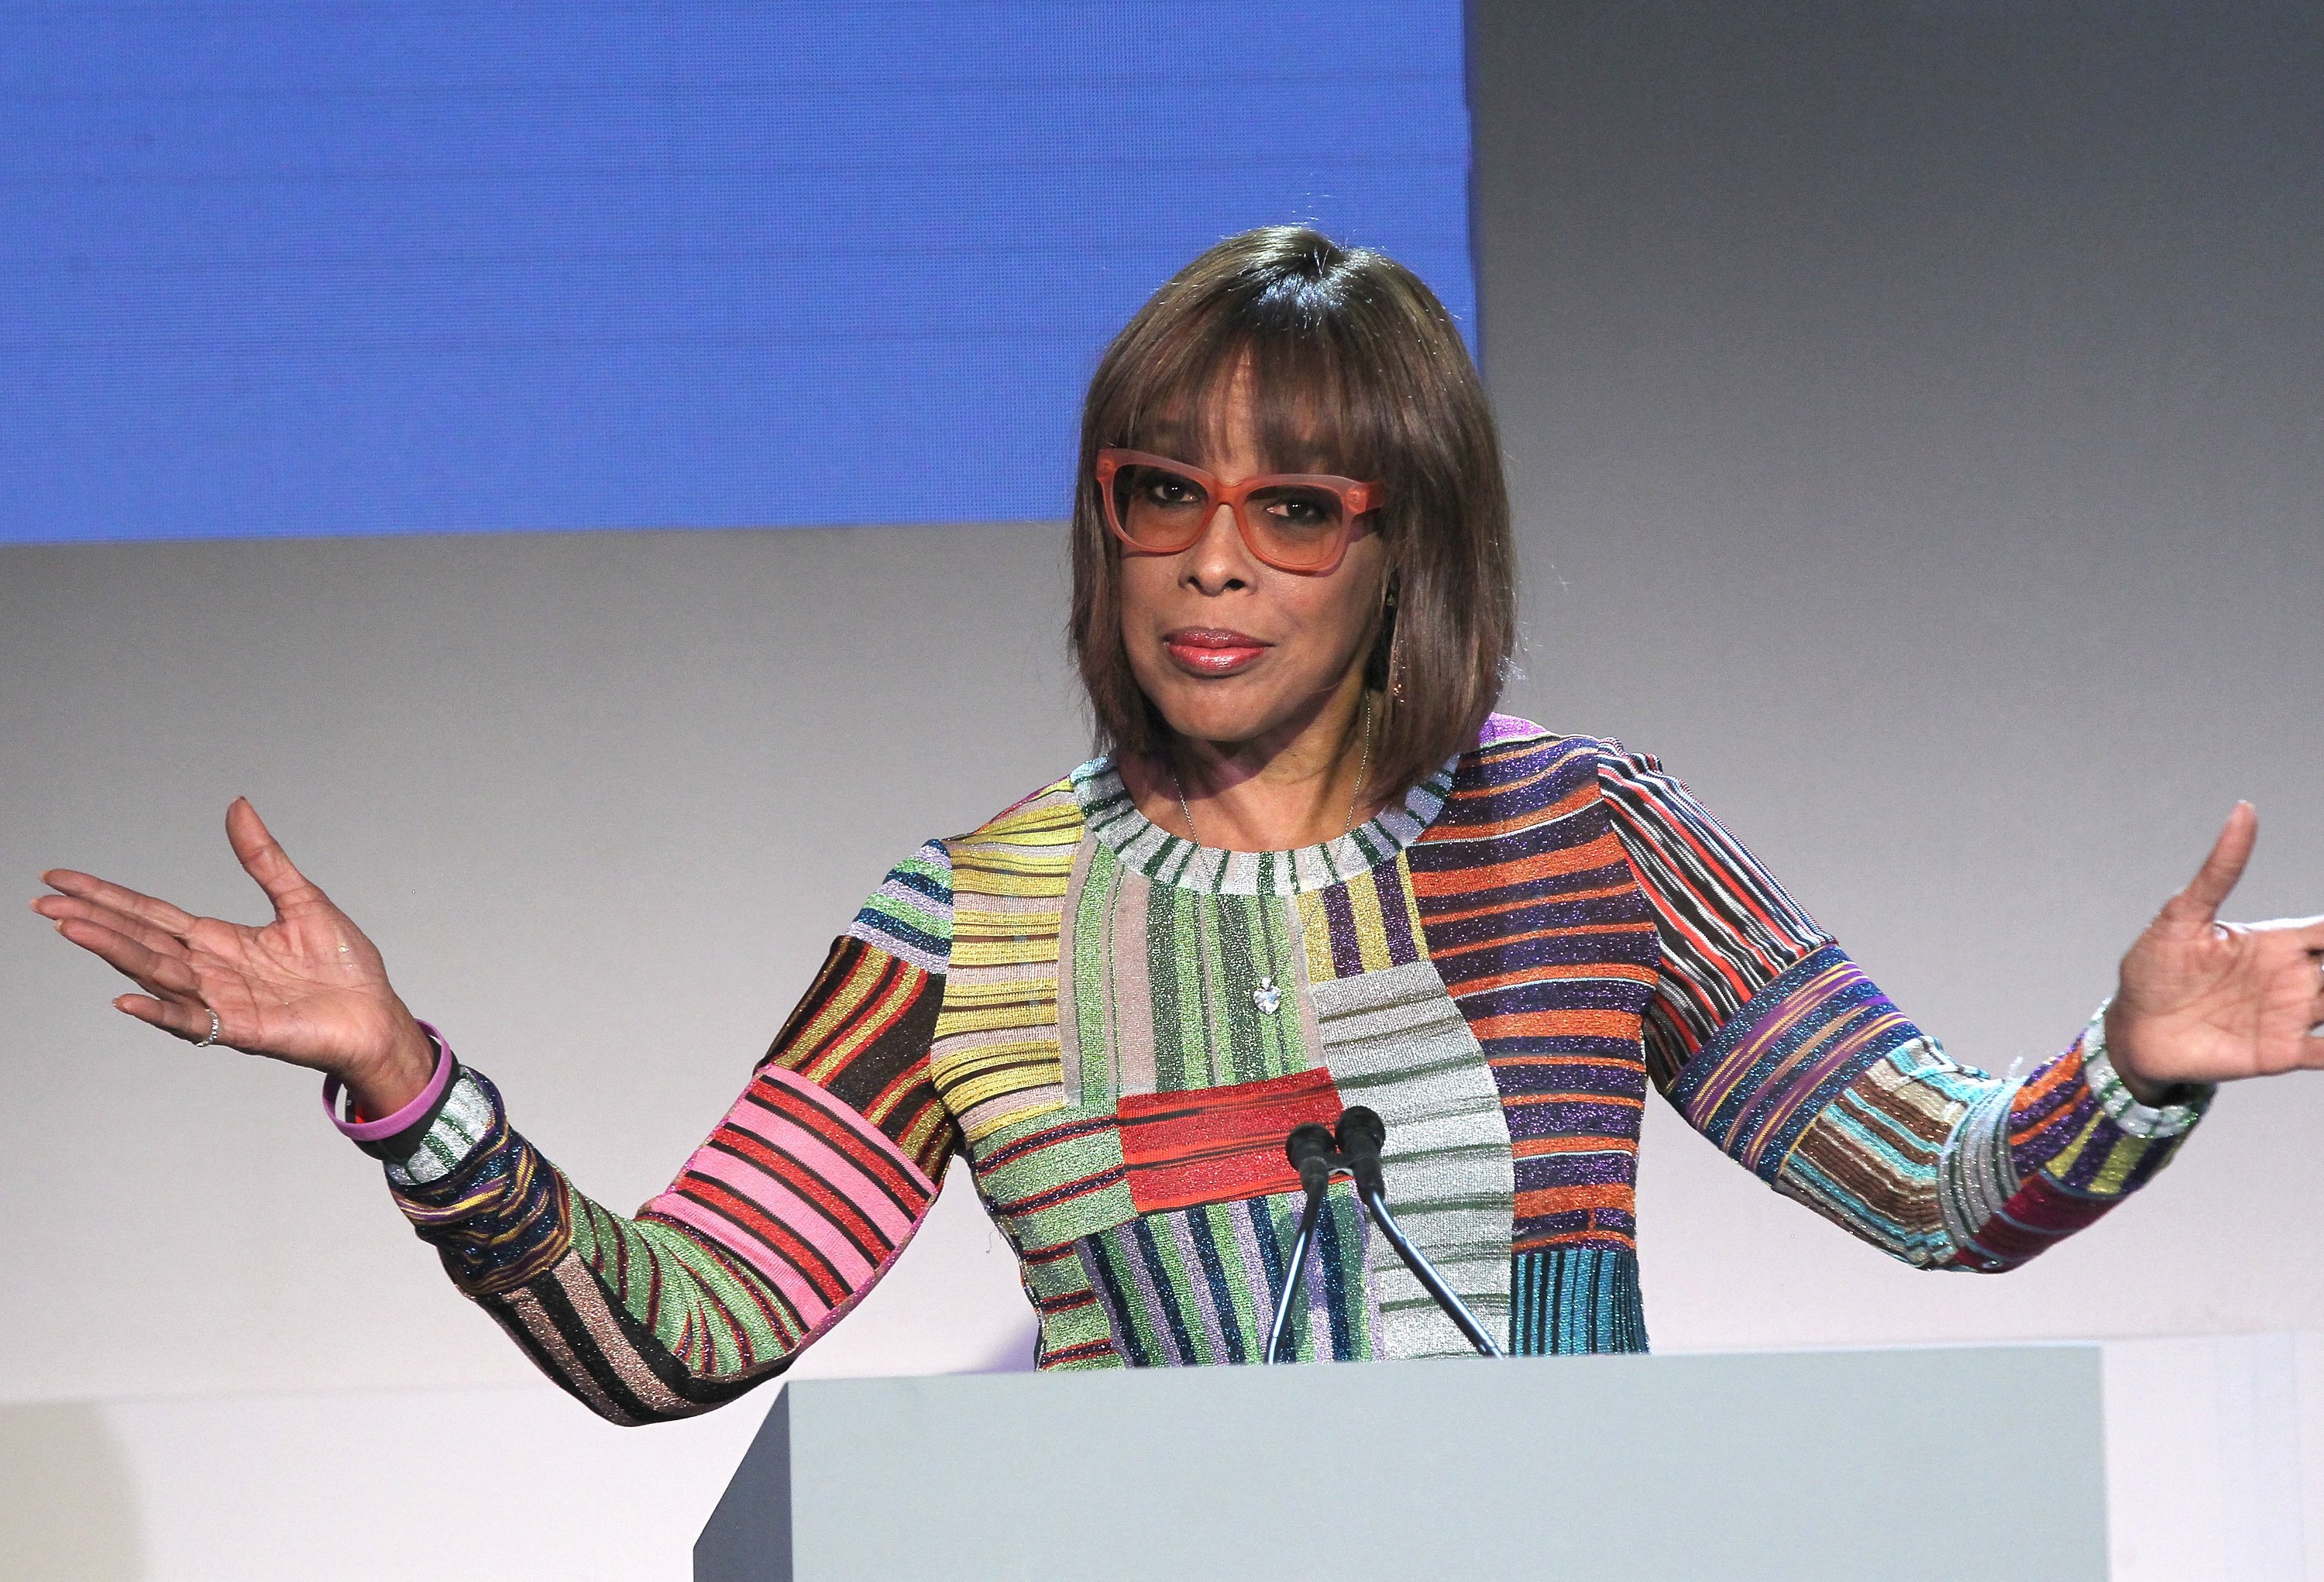 Gayle King speaks onstage at the WSJ. Magazine 2018 Innovator Awards. November 7, 2018 | Photo: GettyImages